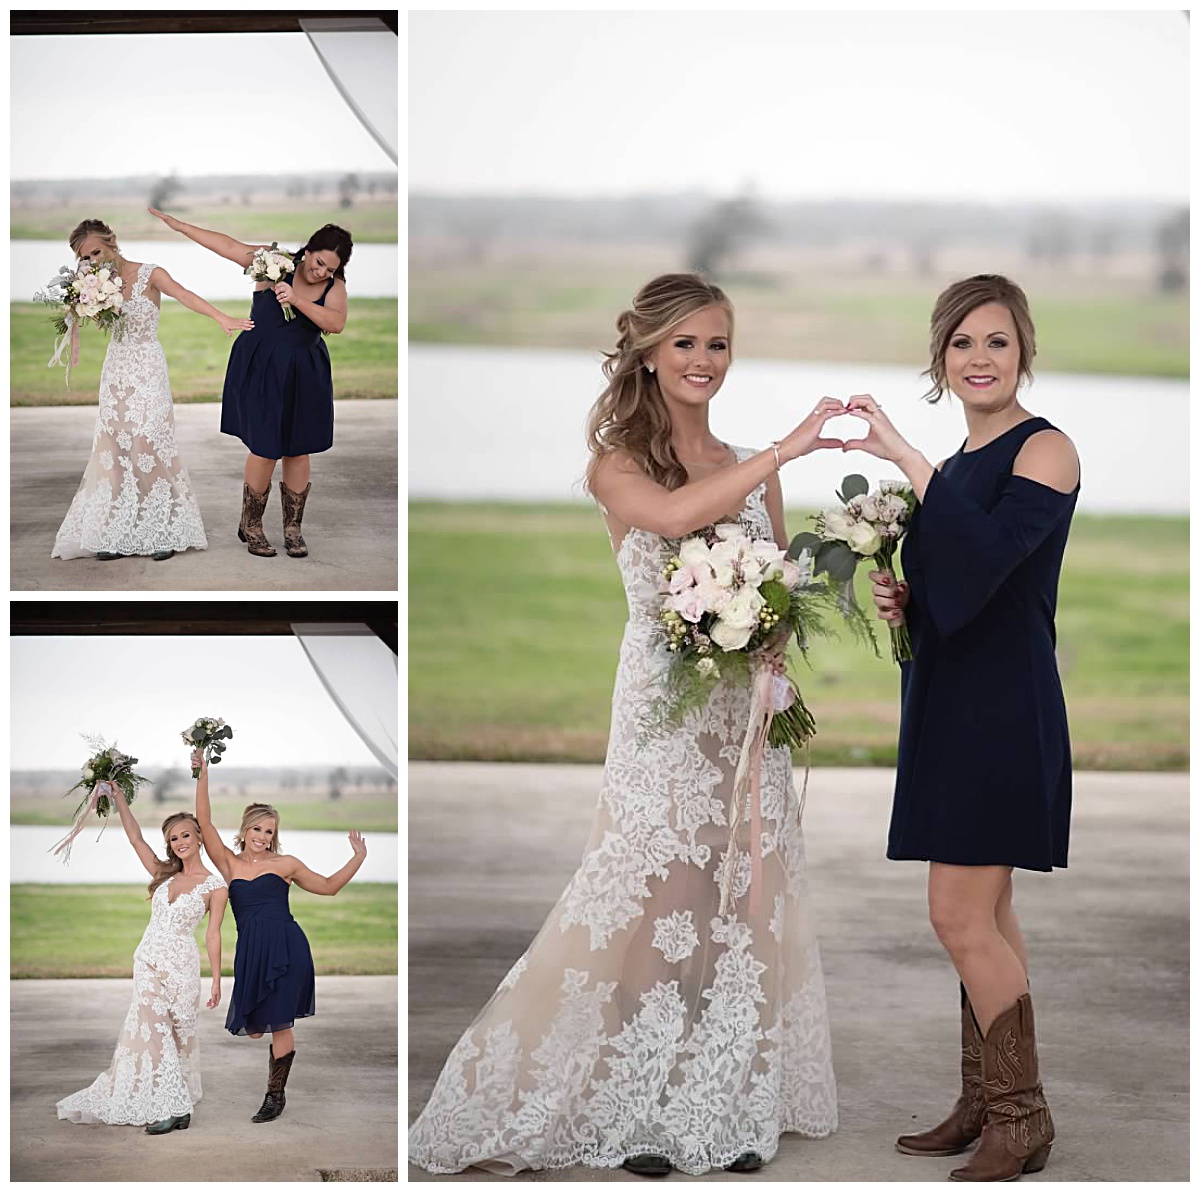 The Bride with her Bridesmaids at her fabulous Winter Wedding Texas- Style 